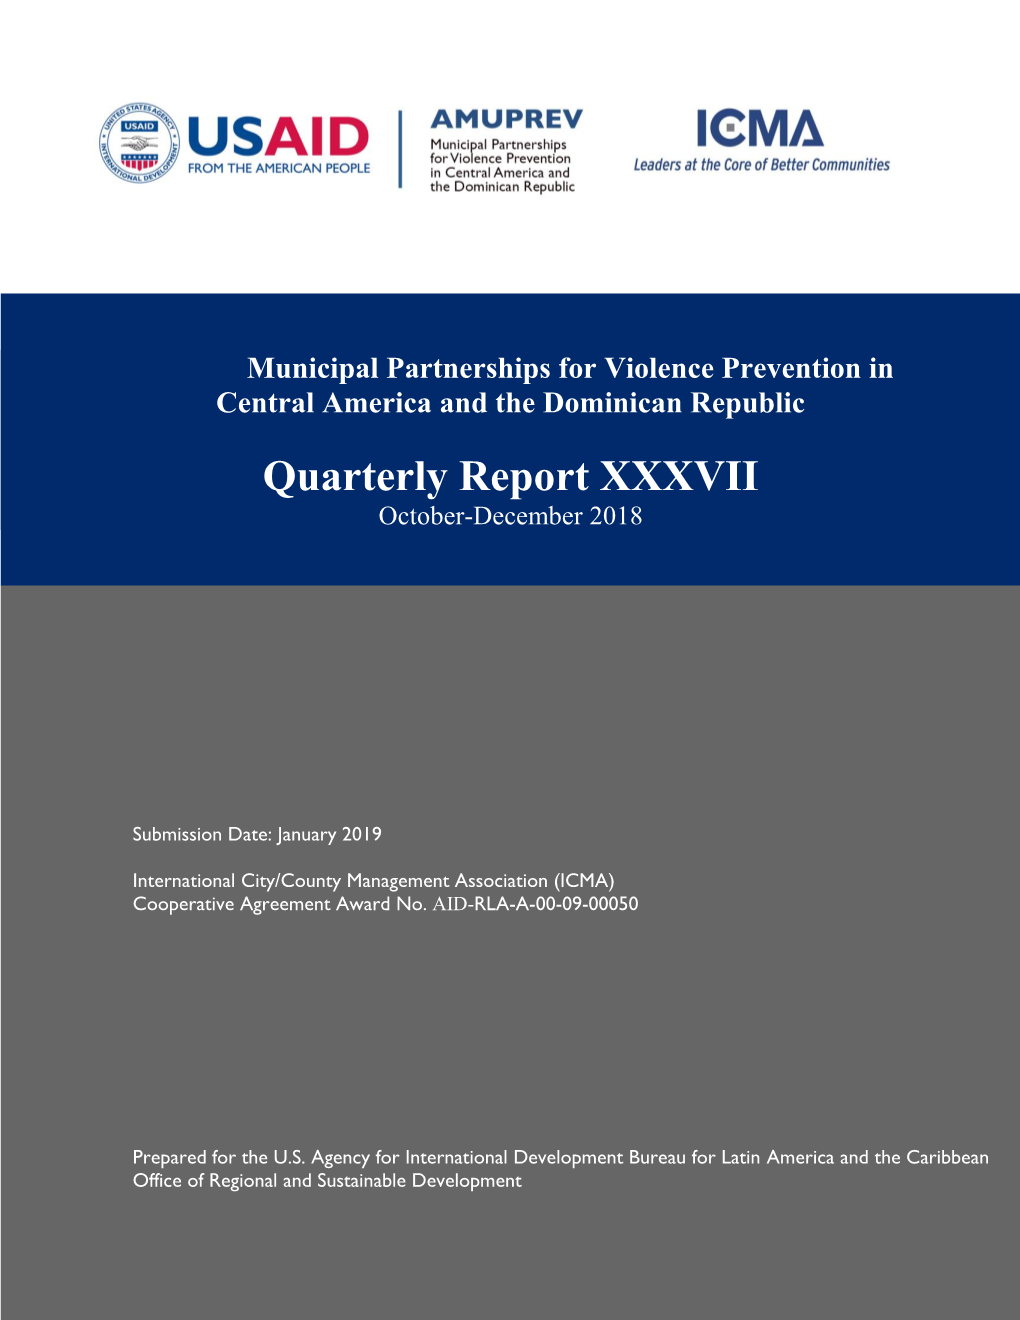 Municipal Partnerships for Violence Prevention in Central America and the Dominican Republic